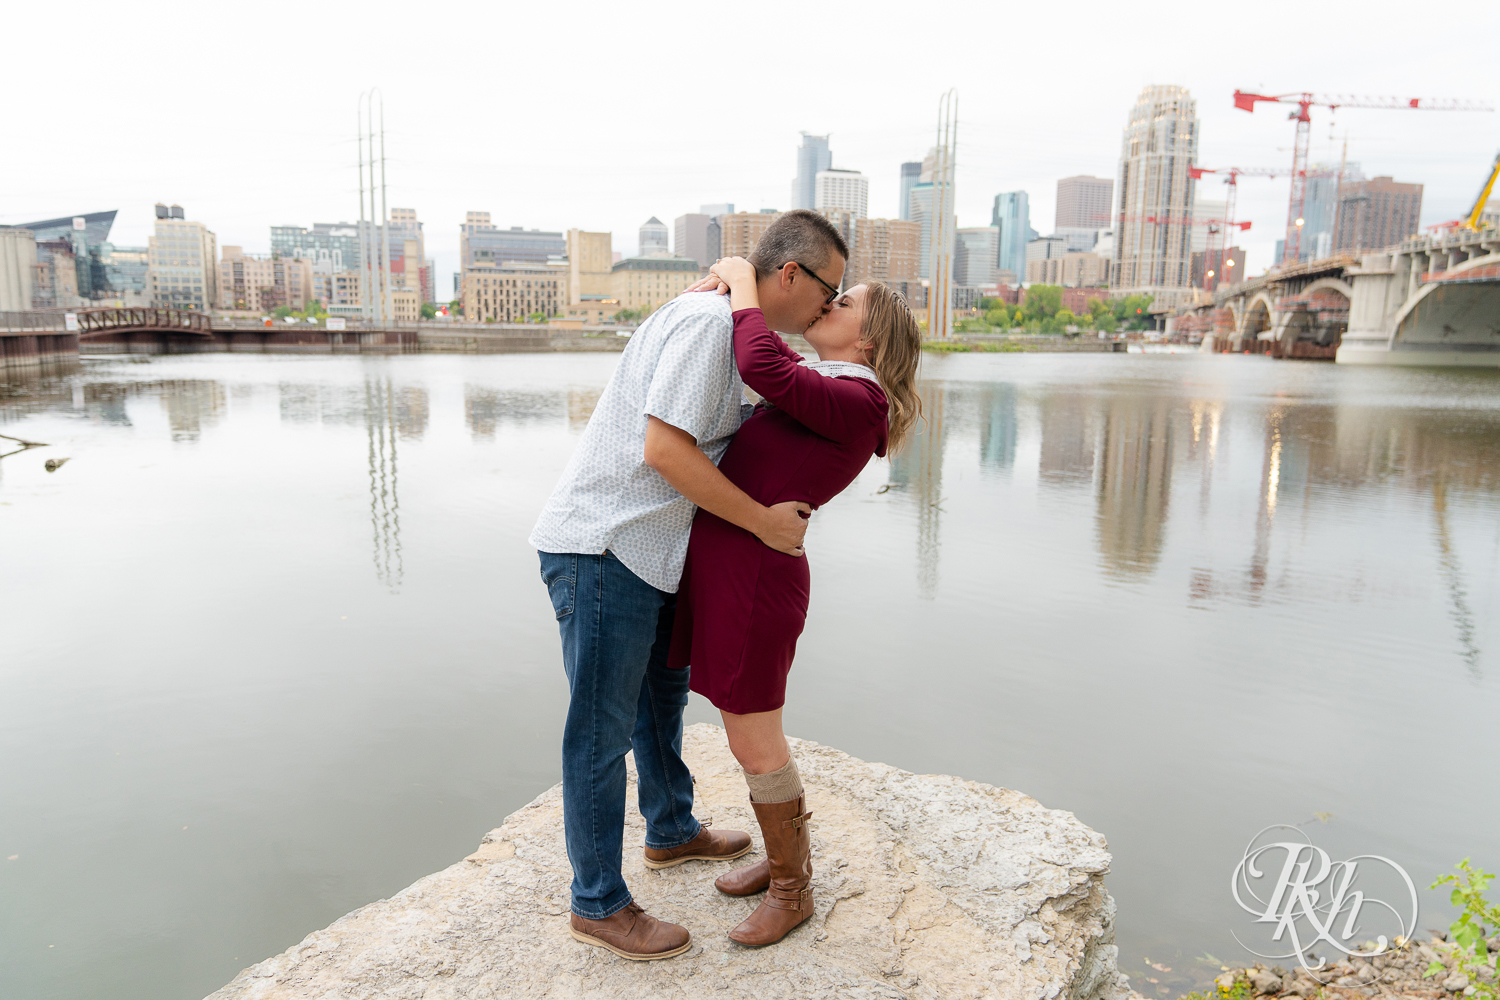 Man in glasses and woman is red dress and scarf kissing in Minneapolis, Minnesota with skyline in the background.